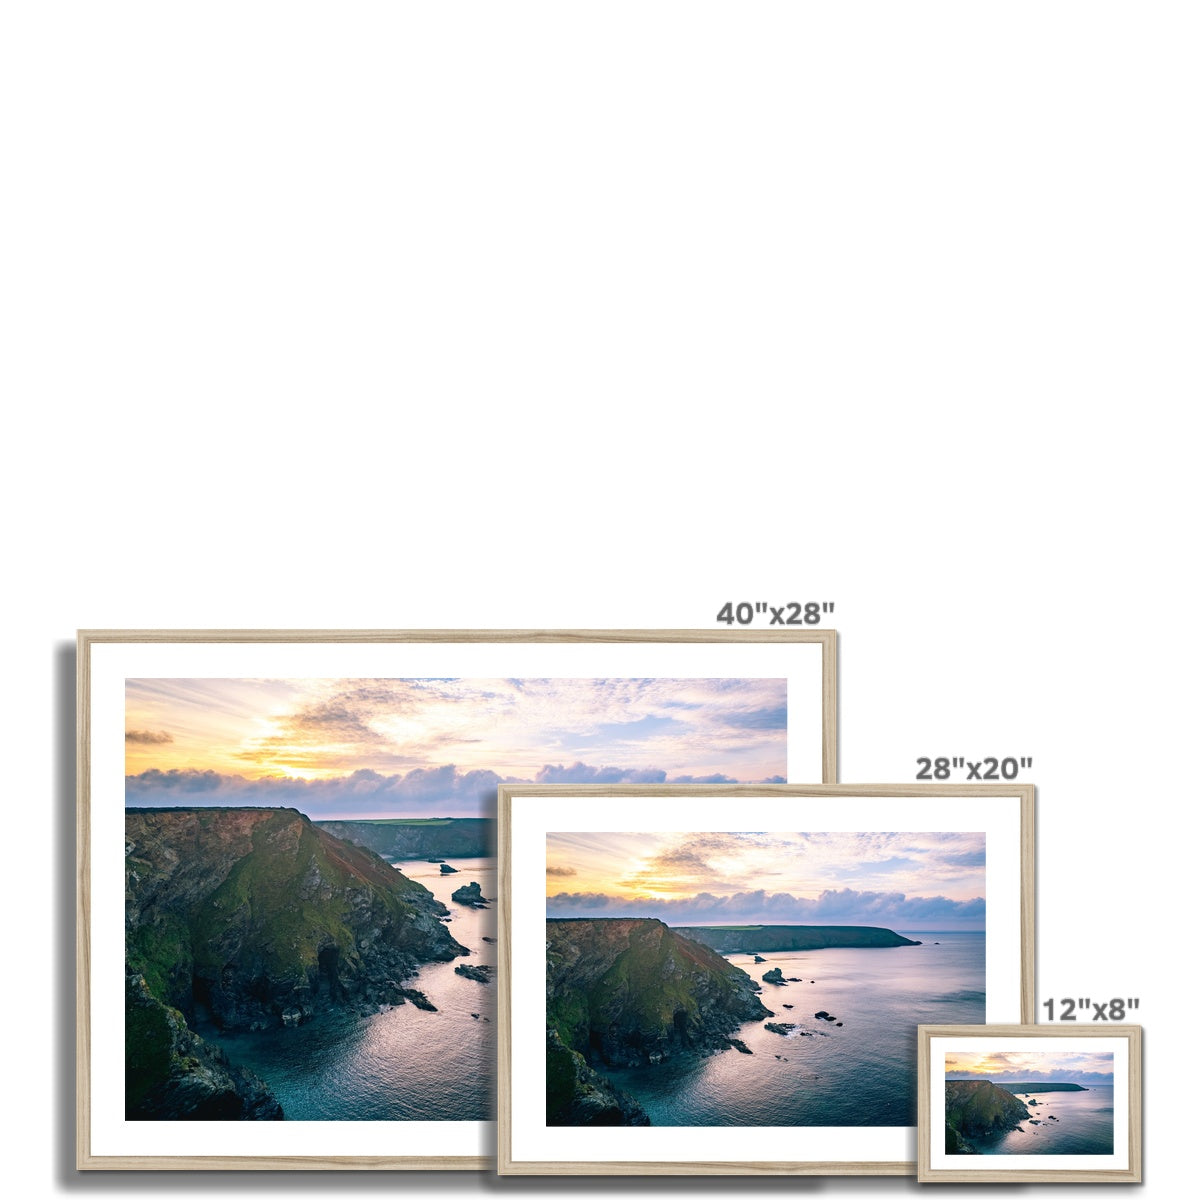 hells mouth wooden frame sizes